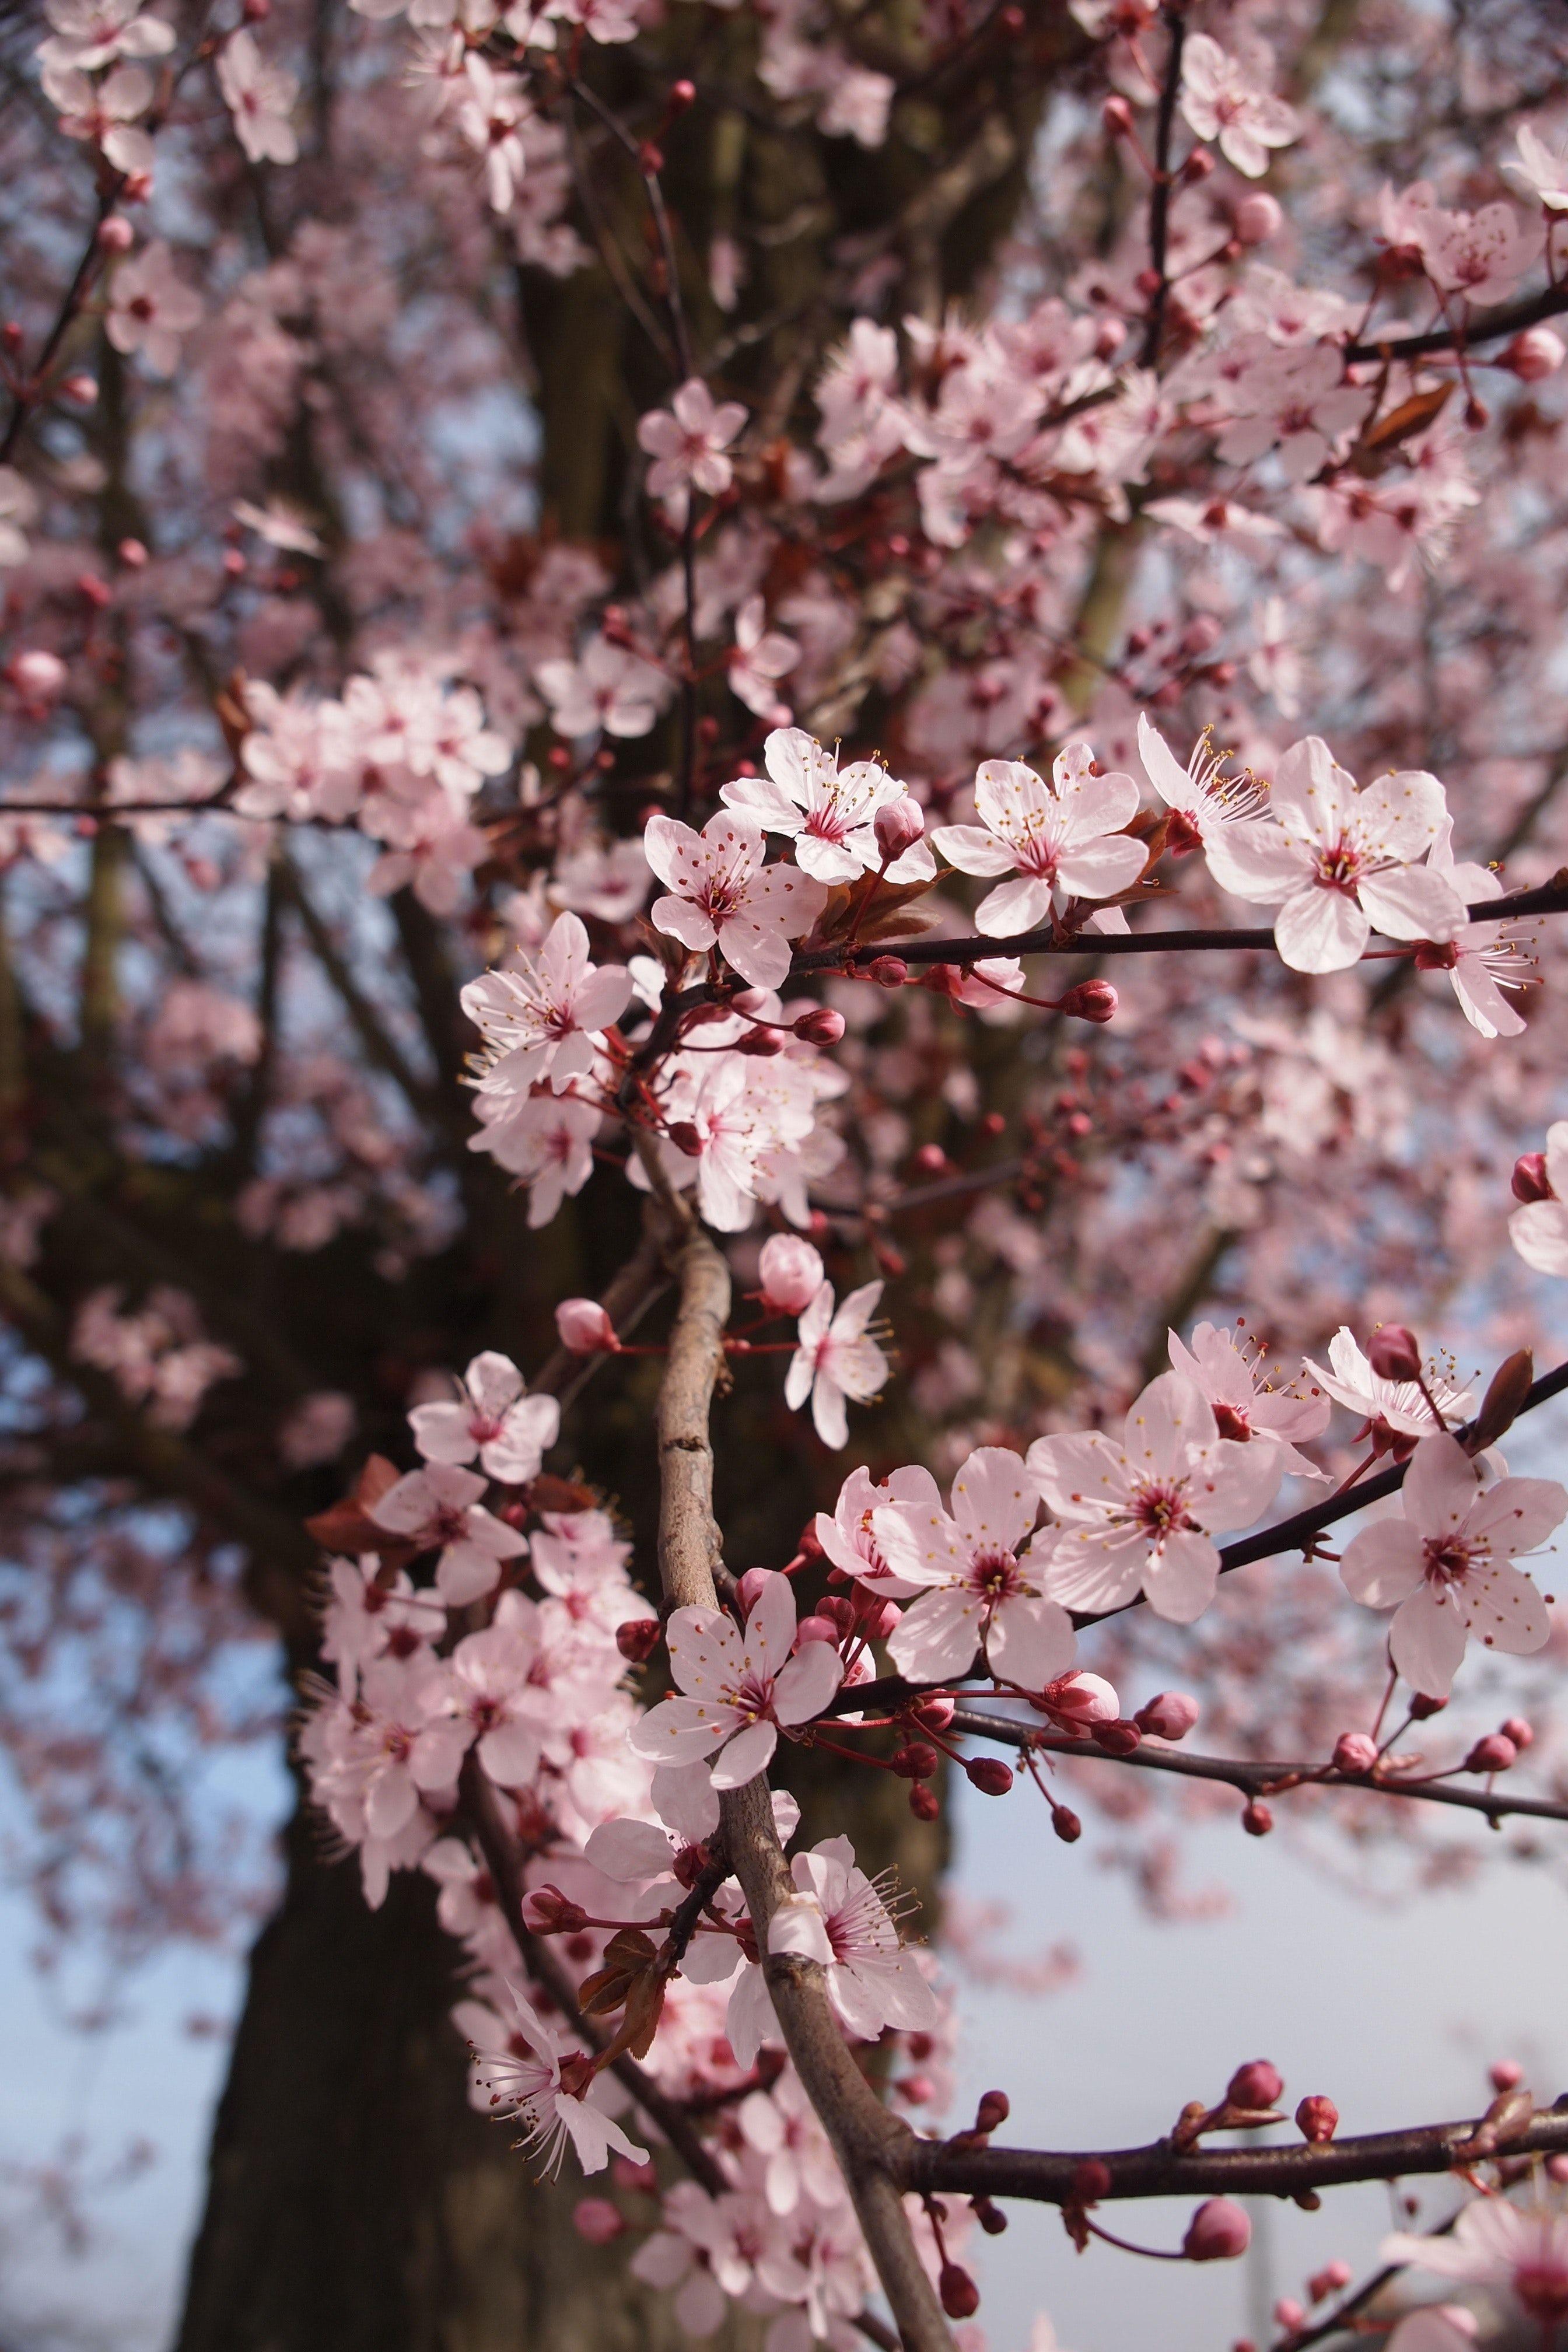 Aesthetic Cherry Blossoms Wallpapers Top Free Aesthetic Cherry